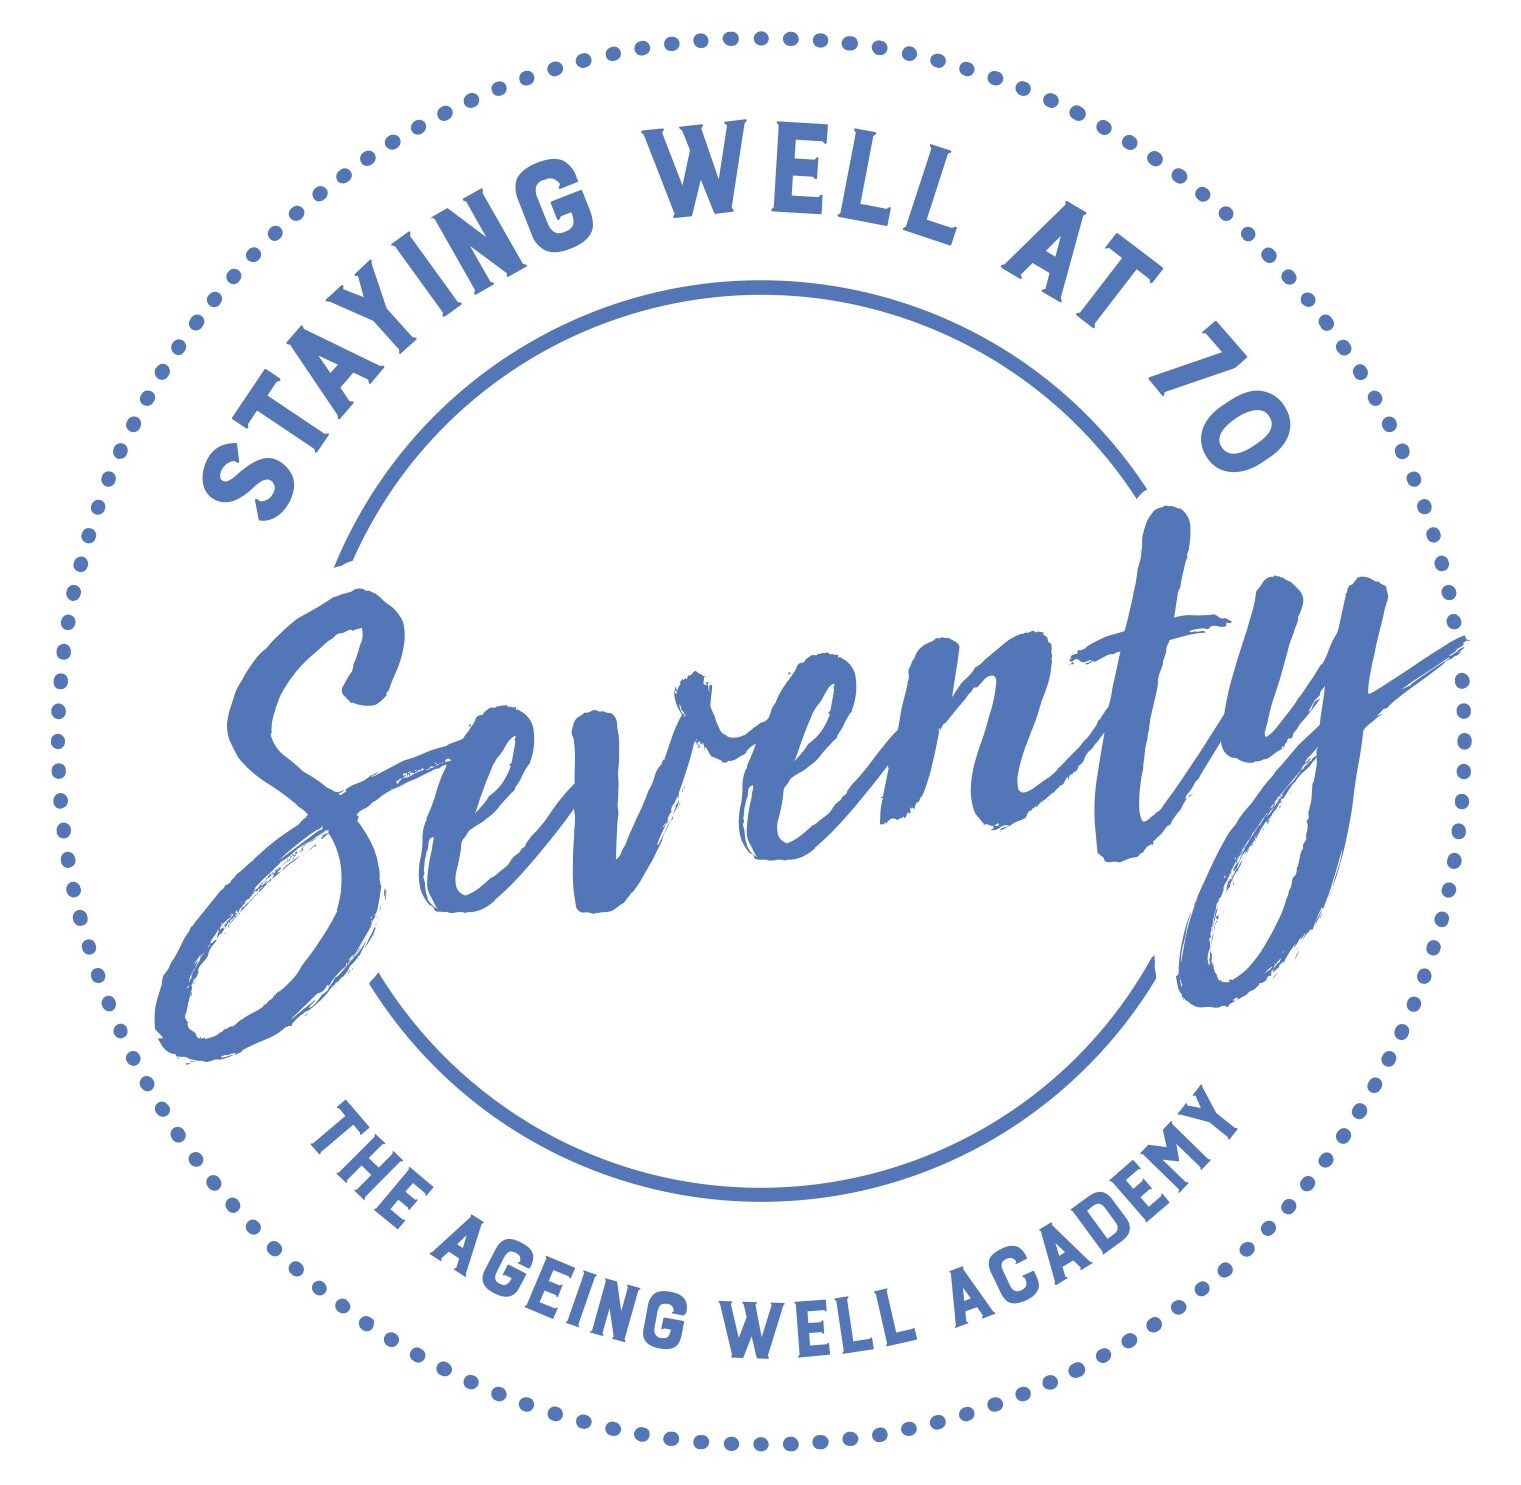 The Ageing Well Academy